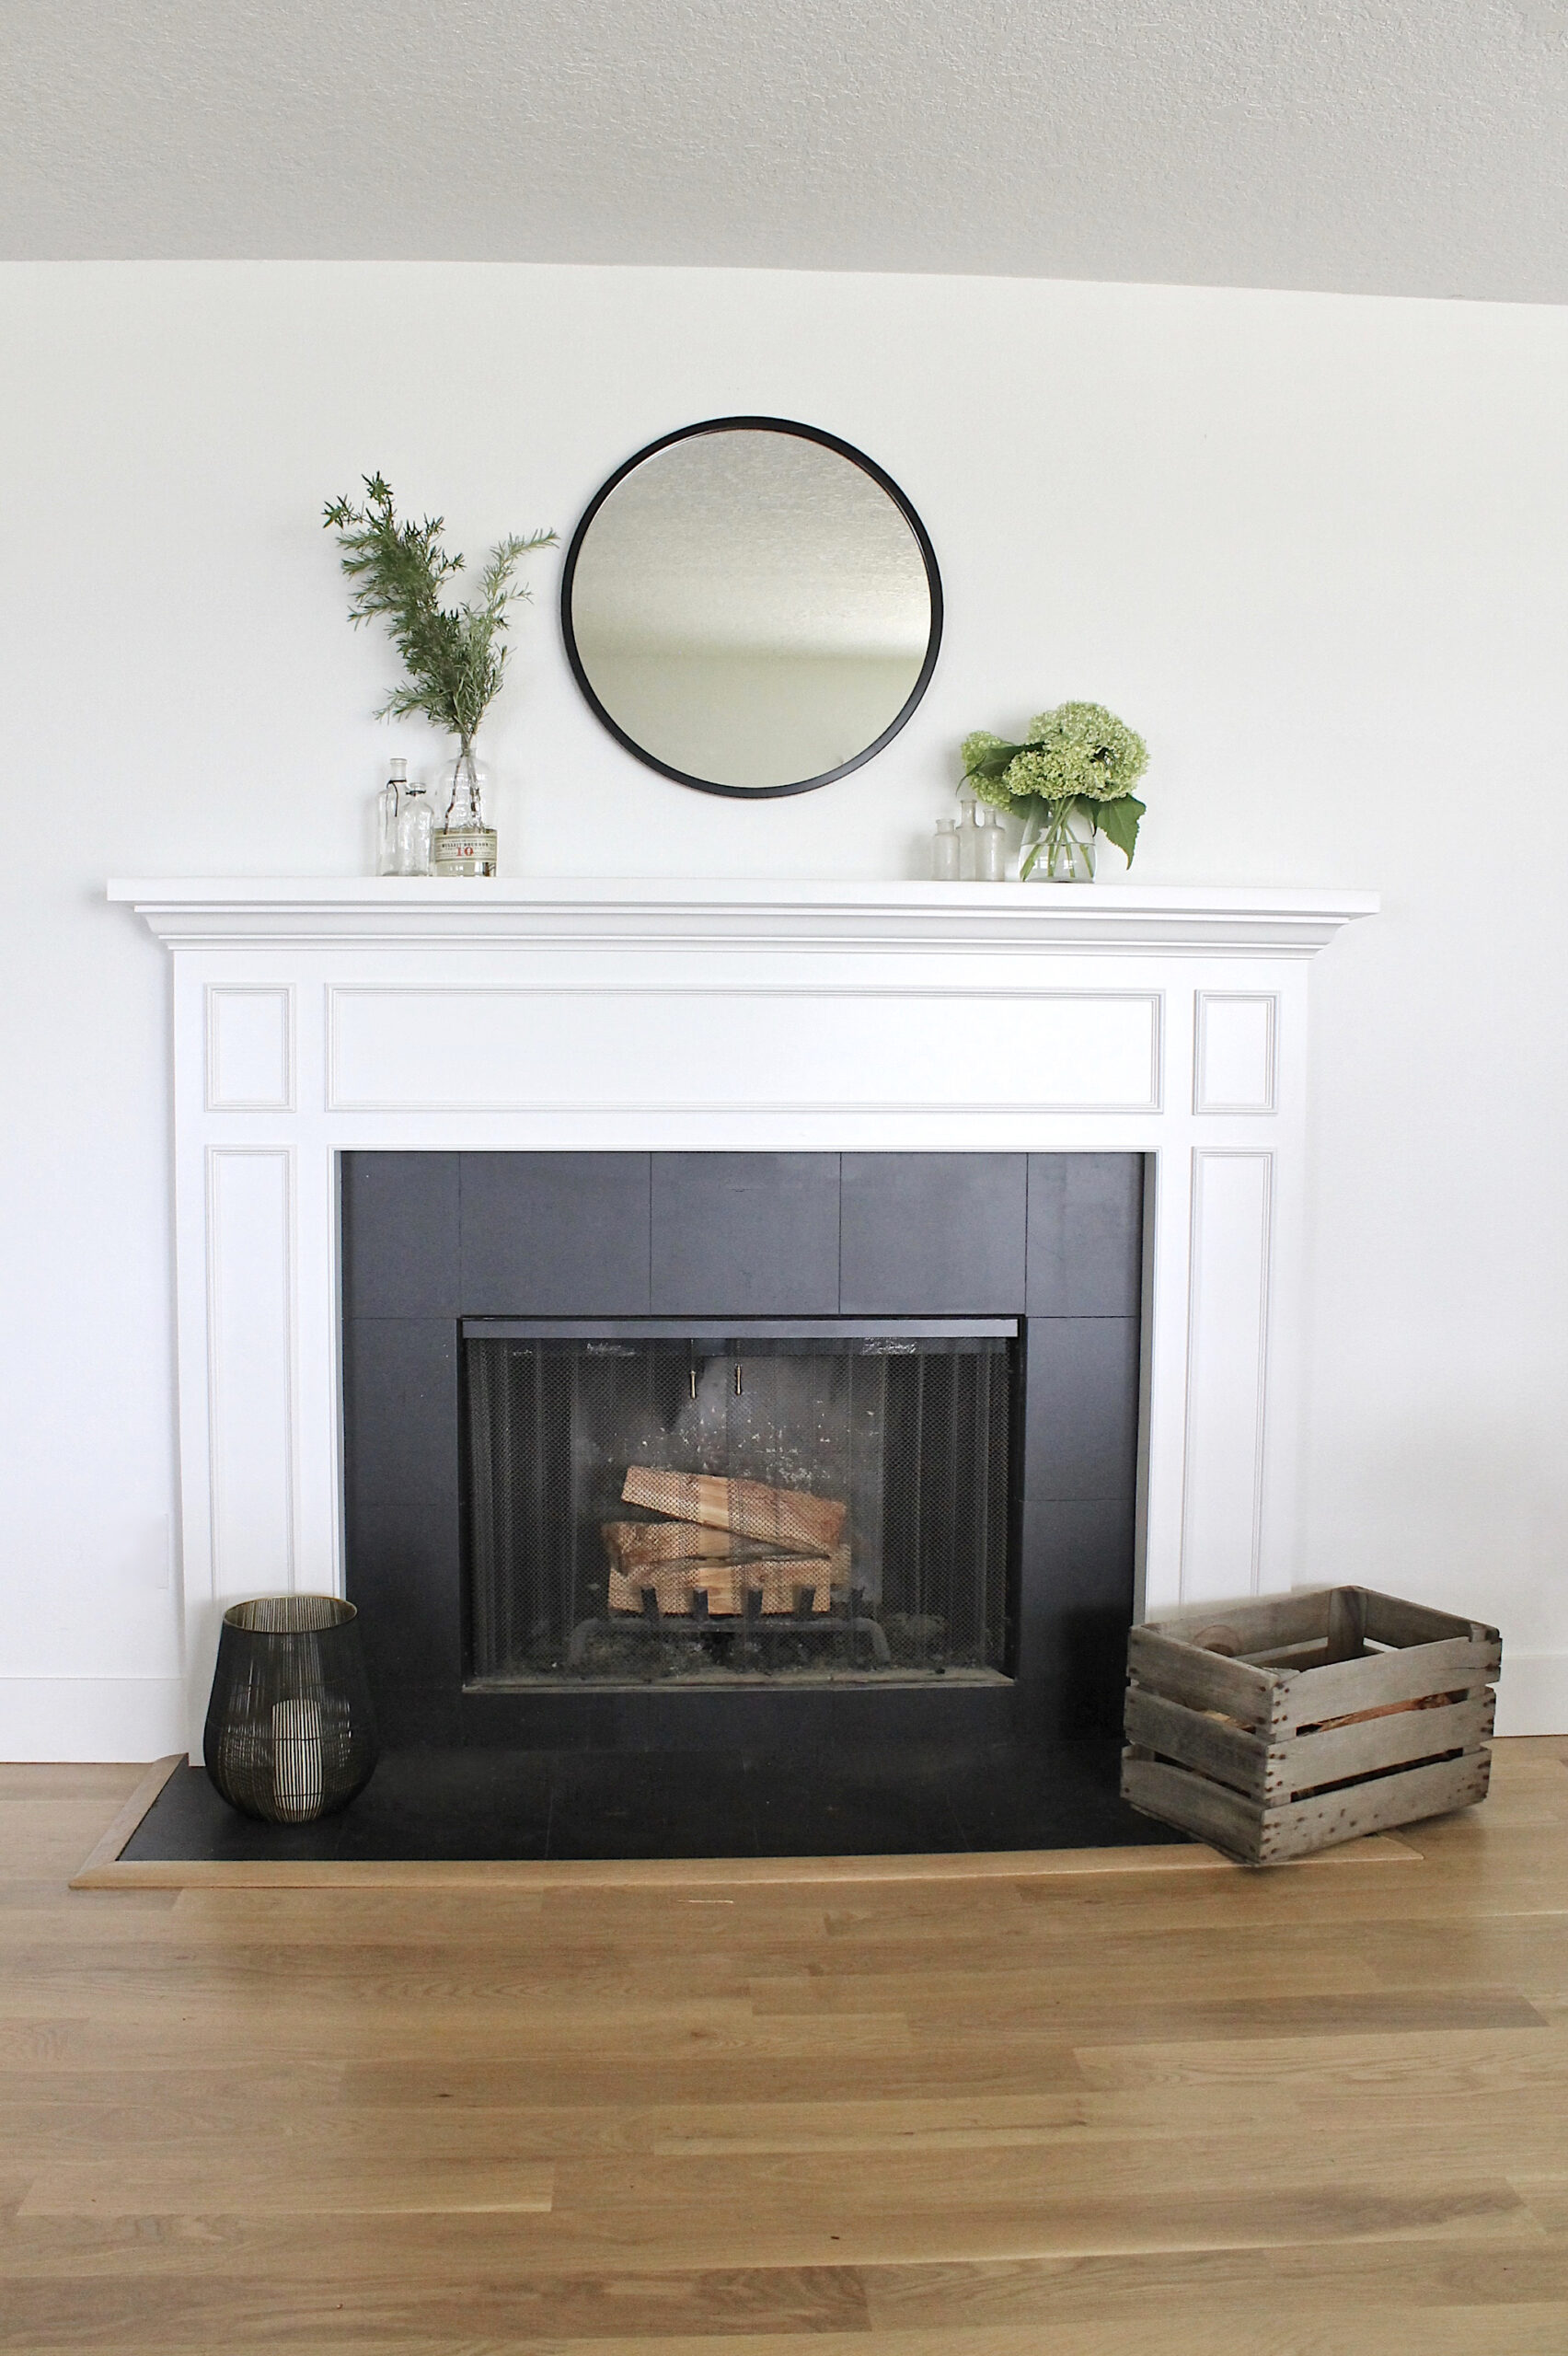 How To Paint A Ceramic Tile Fireplace, How To Change Tile Around Fireplace